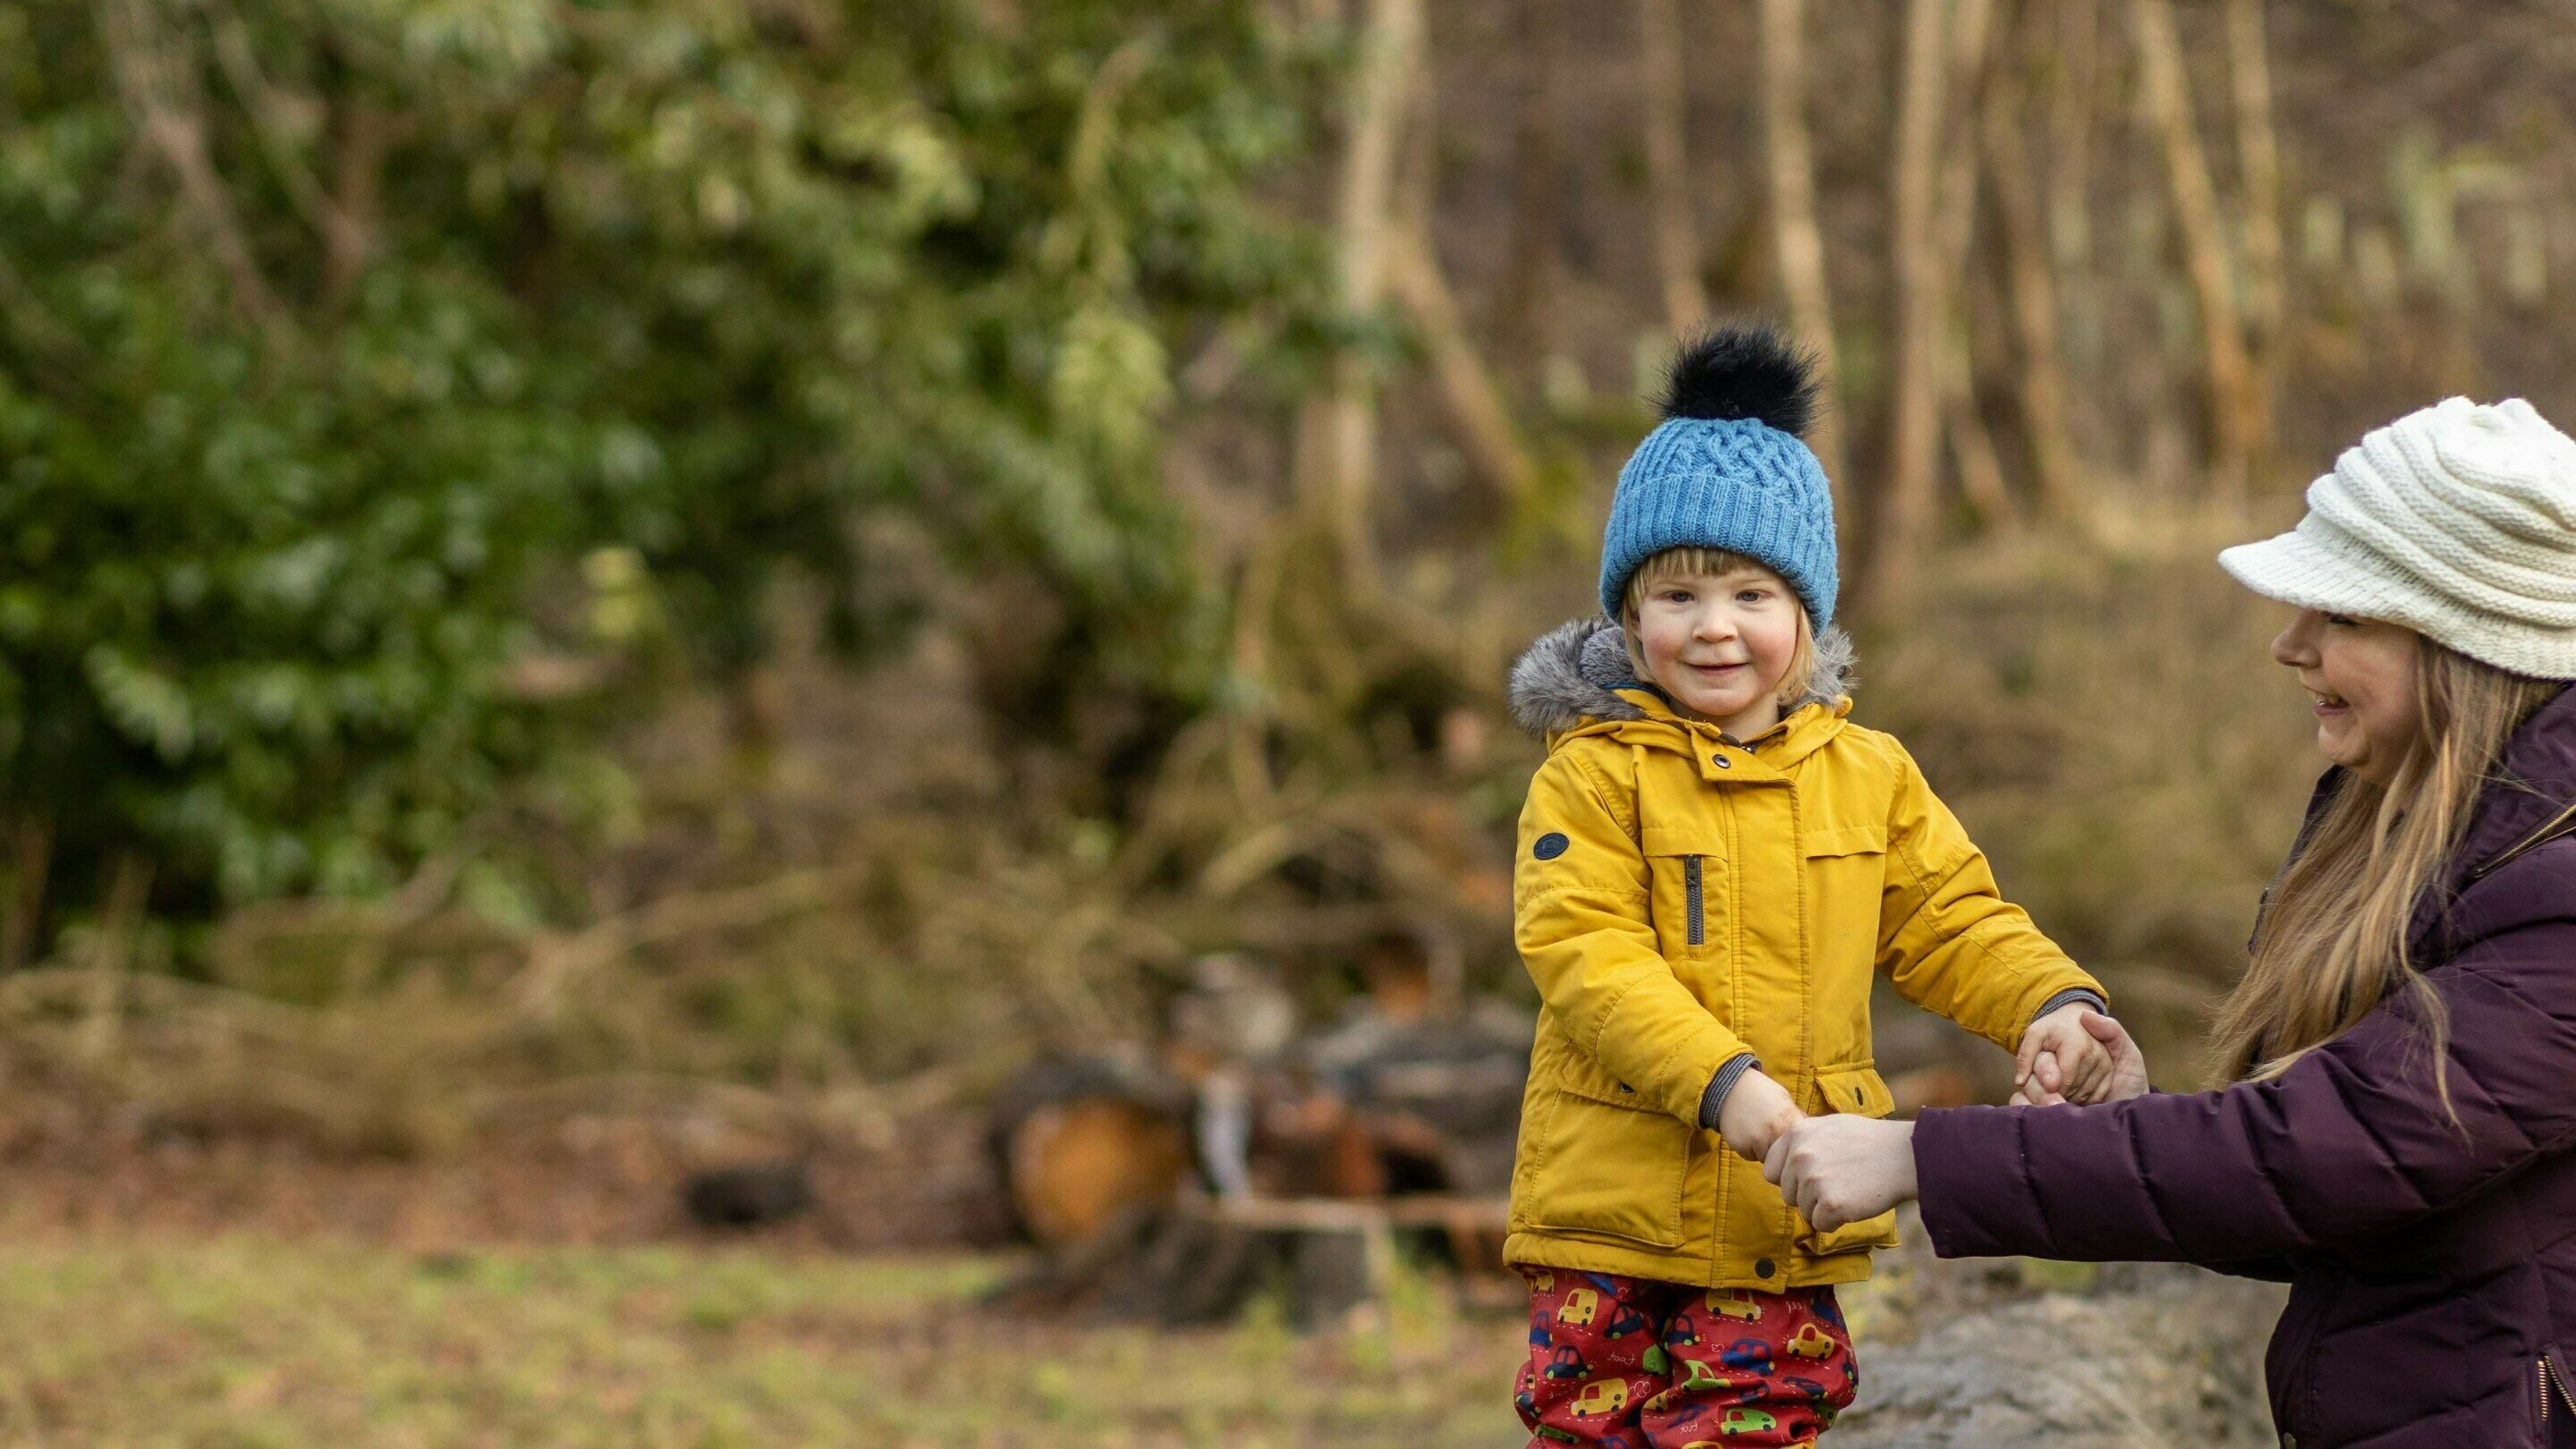 A mum helping her toddler son walk across a log in a forest, mum is smiling after becoming debt free with CAP.